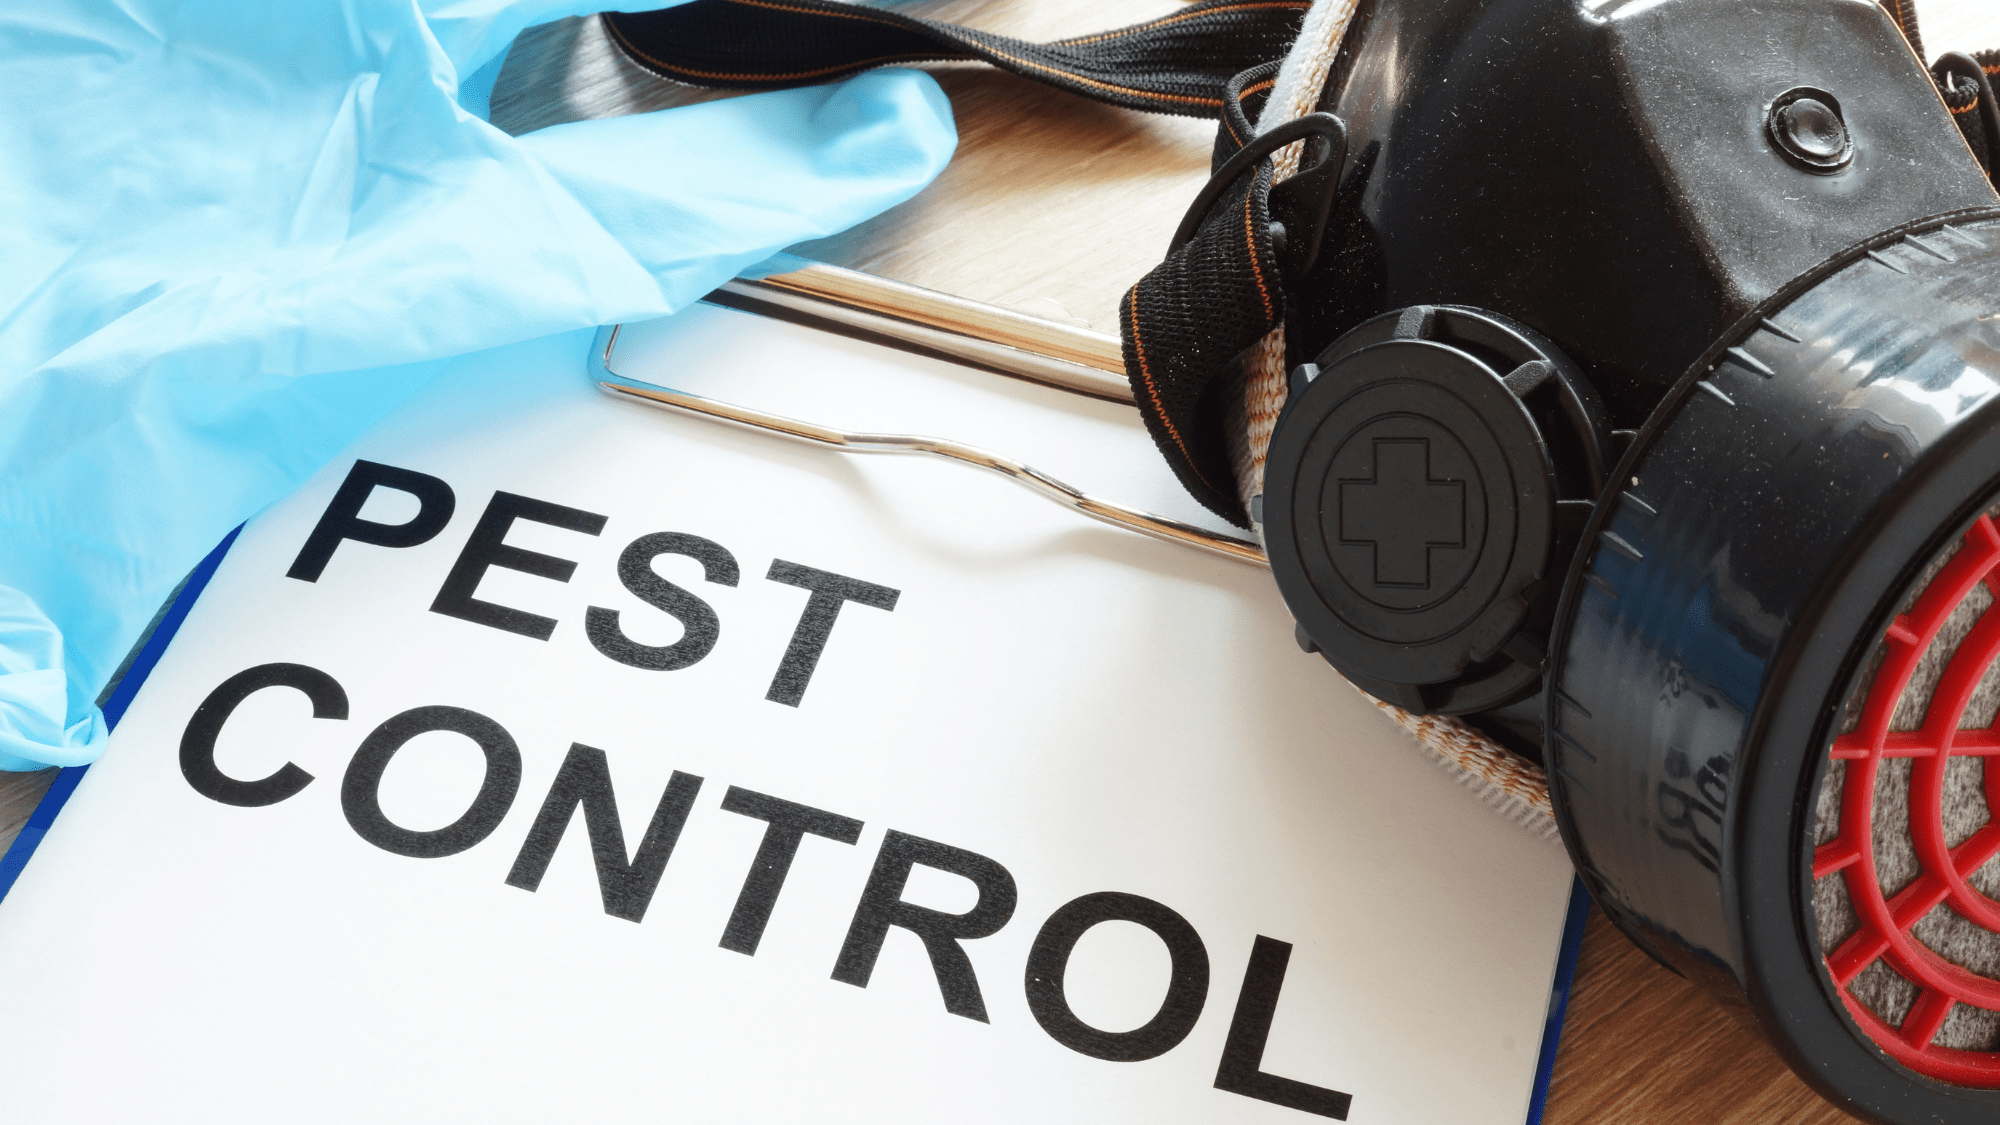 What Qualities Should A Reputable Pest Control Company Have?